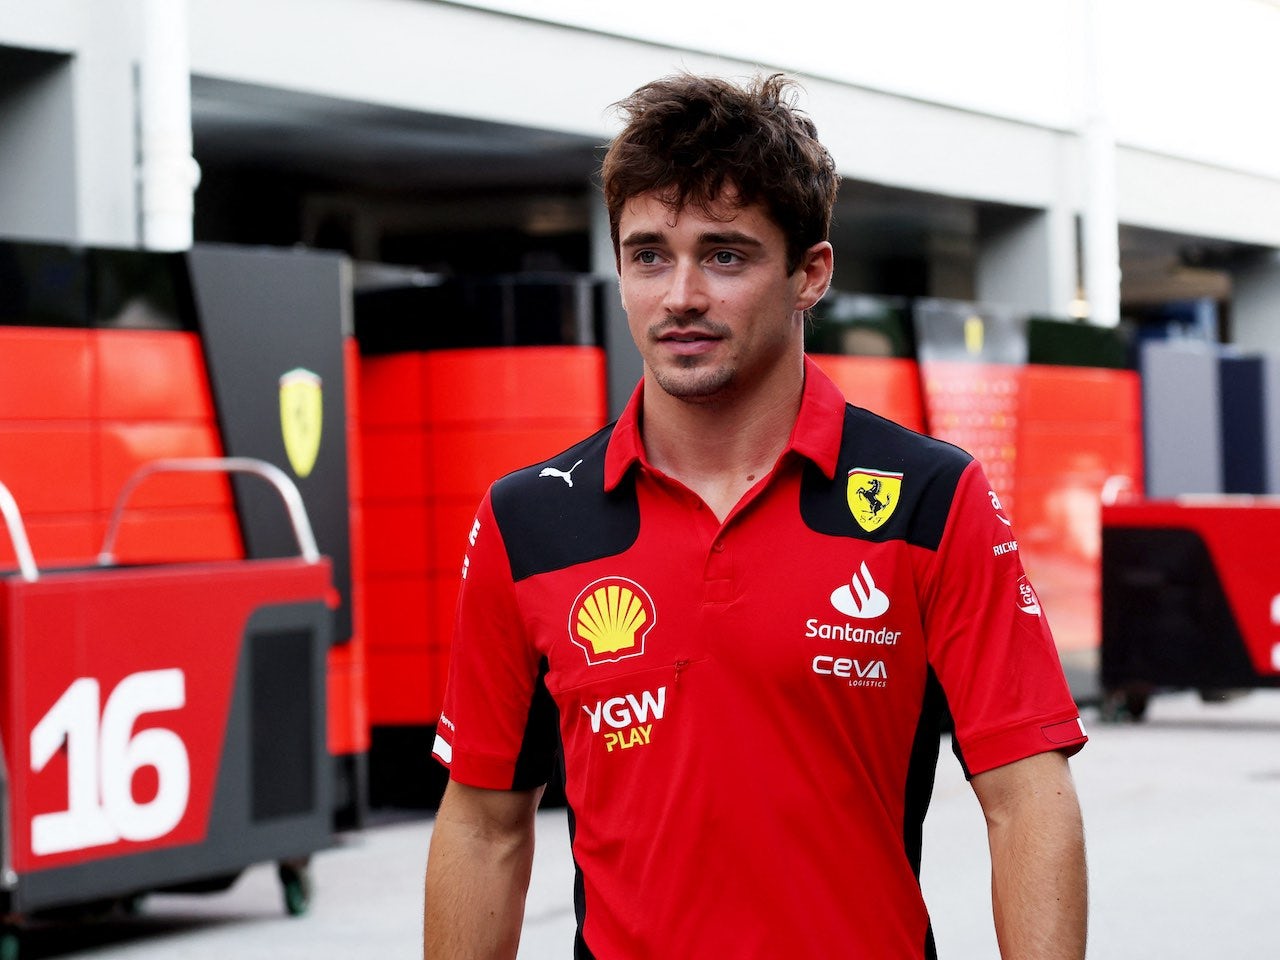 Sainz, Leclerc see their F1 futures in red